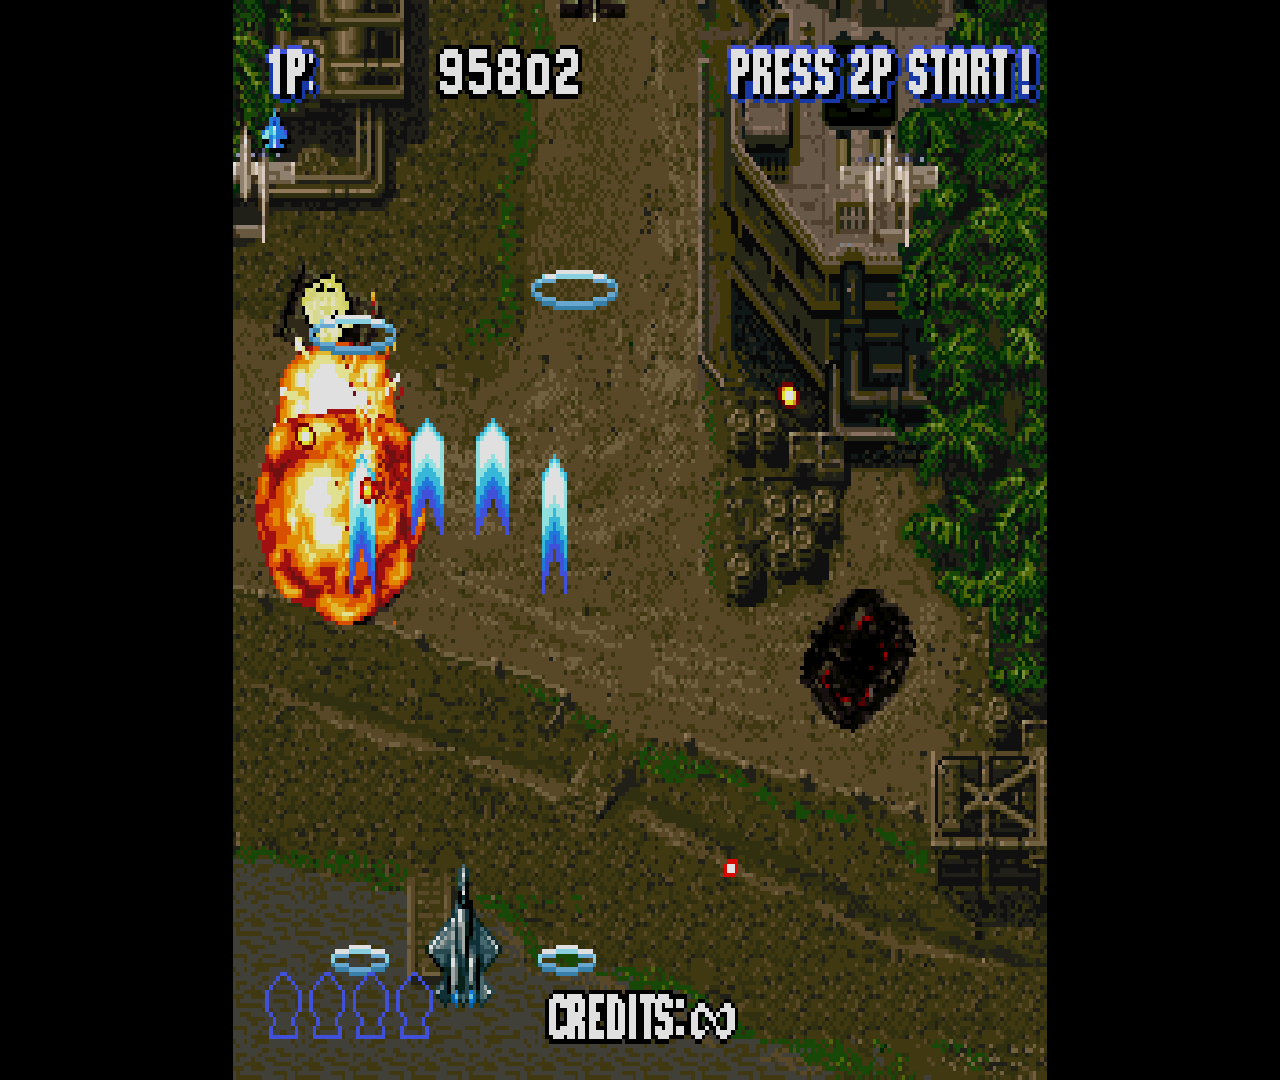 Figure 18 - Nice graphics and explosions but no parallax scrolling or transparency in this game